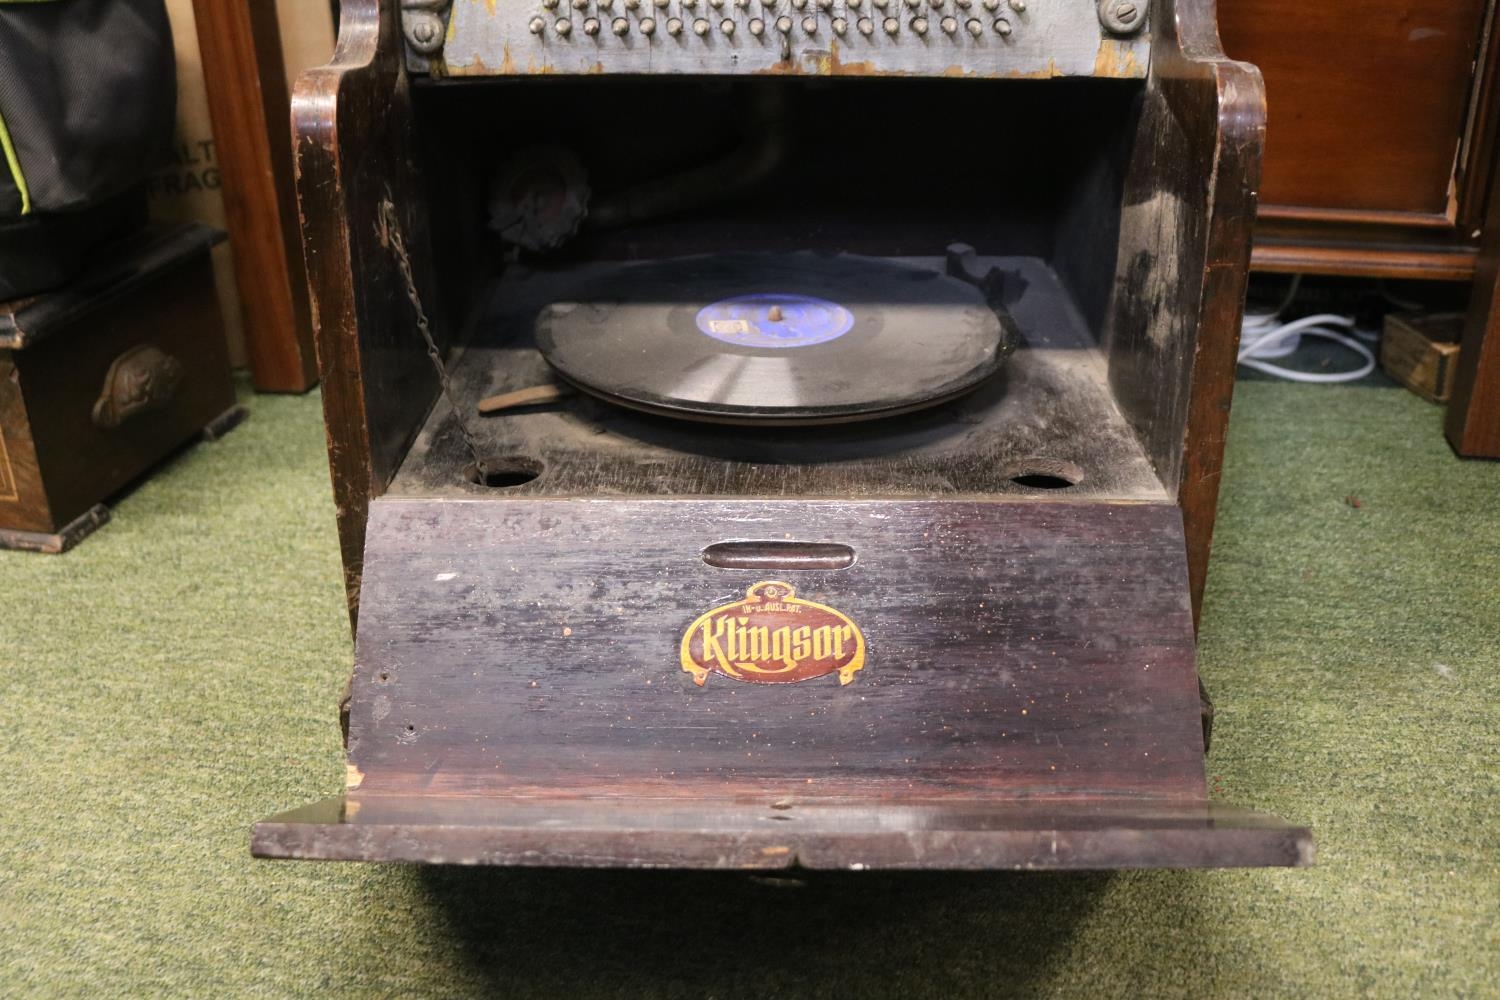 Unusual early twentieth century Klingsor phonograph in oak case with flap down front exposing record - Image 3 of 3